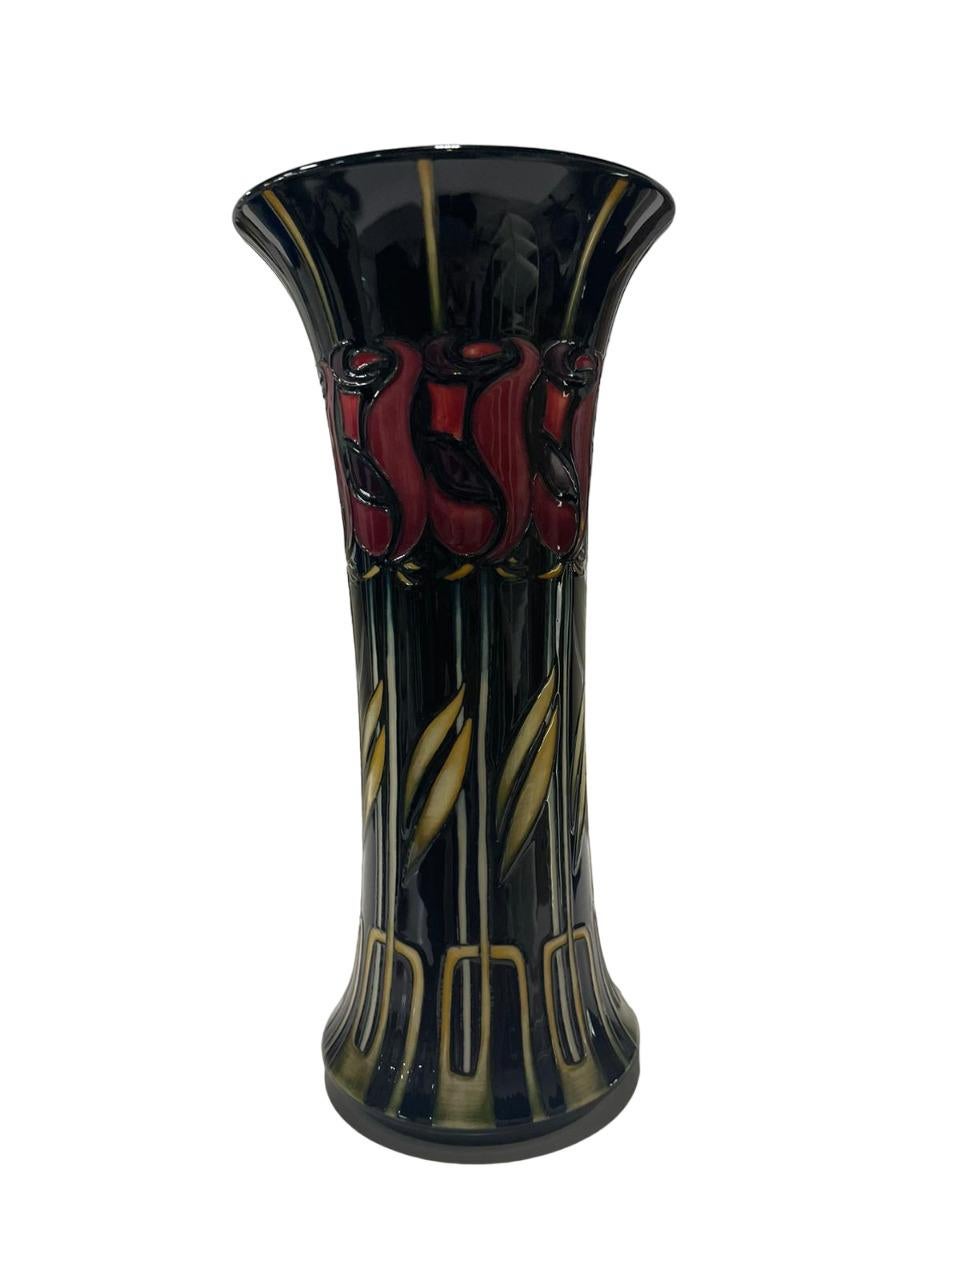 Ceramic DISCONTINUED MOORCROFT Night ROSE pattern by Nicola Slaney, dated 2000. Boxed For Sale